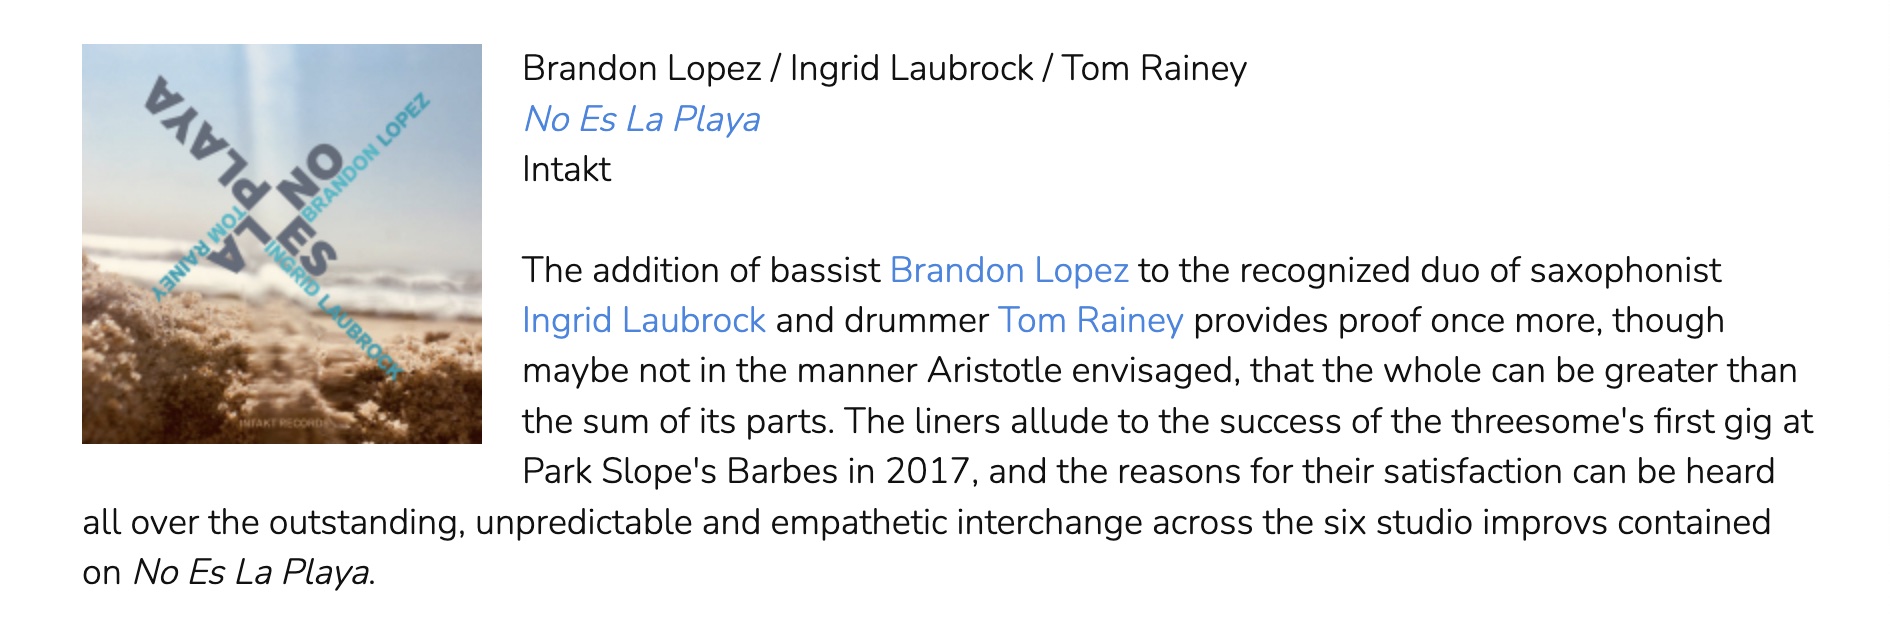 The addition of bassist Brandon Lopez to the recognized duo of saxophonist Ingrid Laubrock and drummer Tom Rainey provides proof once more, though maybe not in the manner Aristotle envisaged, that the whole can be greater than the sum of its parts. The liners allude to the success of the threesome's first gig at Park Slope's Barbes in 2017, and the reasons for their satisfaction can be heard all over the outstanding, unpredictable and empathetic interchange across the six studio improvs contained on No Es La Playa.